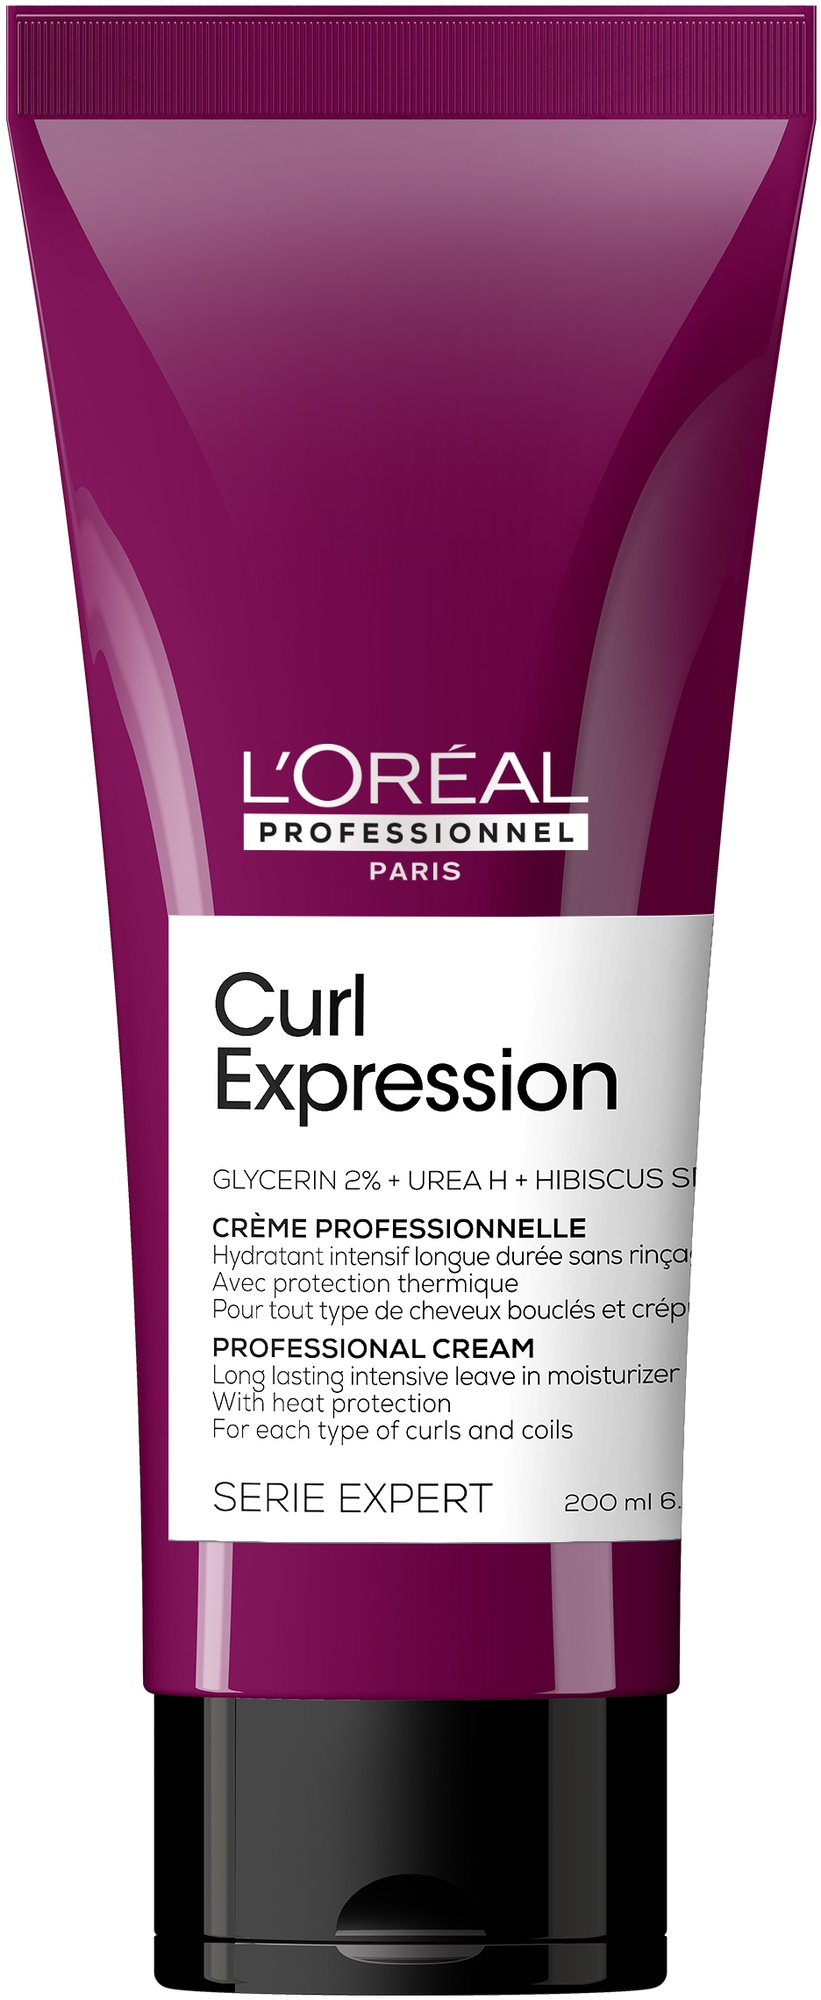 L'Oreal Professionnel Curl Expression Professional Cream Long Lasting Leave In Moisturizer